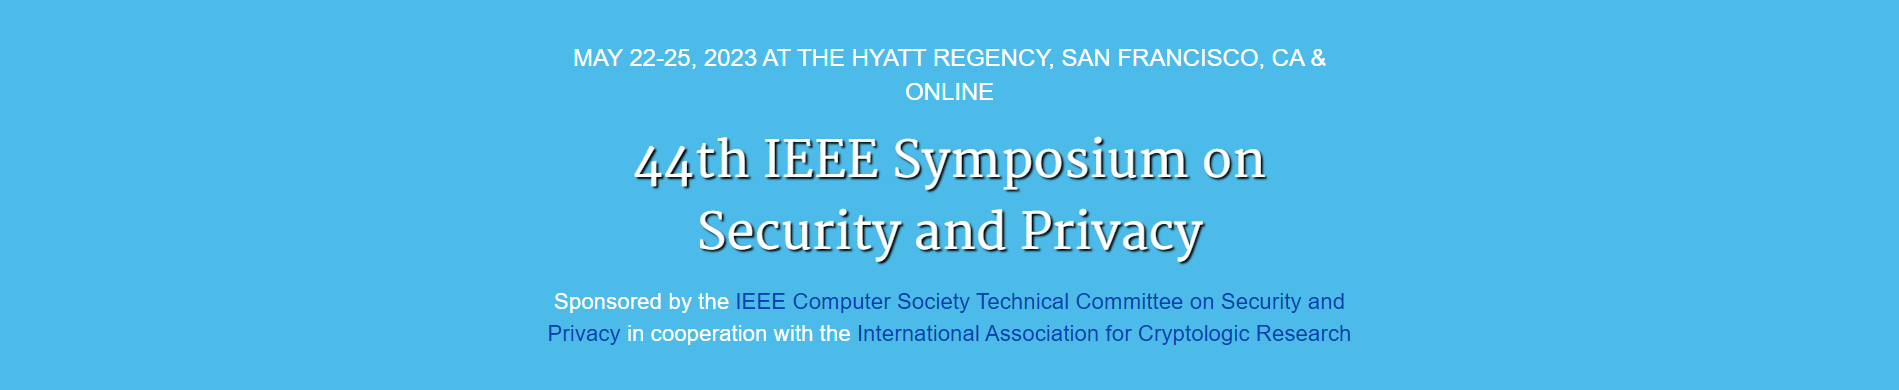 44th IEEE Symposium on Security & Privacy